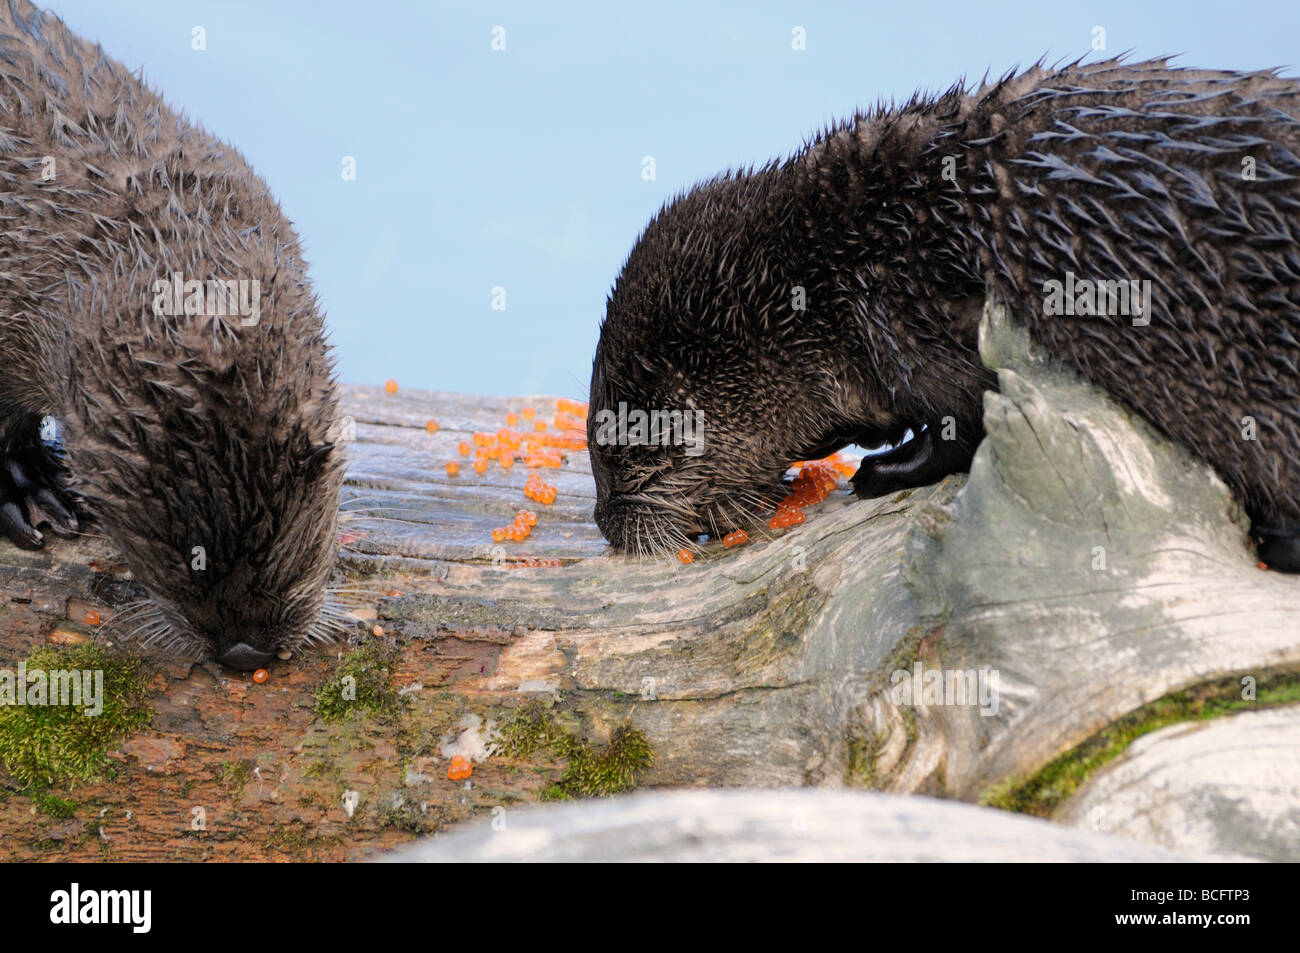 Stock photo of two river otter pups eating the eggs from a spawning trout, Yellowstone National Park, 2009. Stock Photo